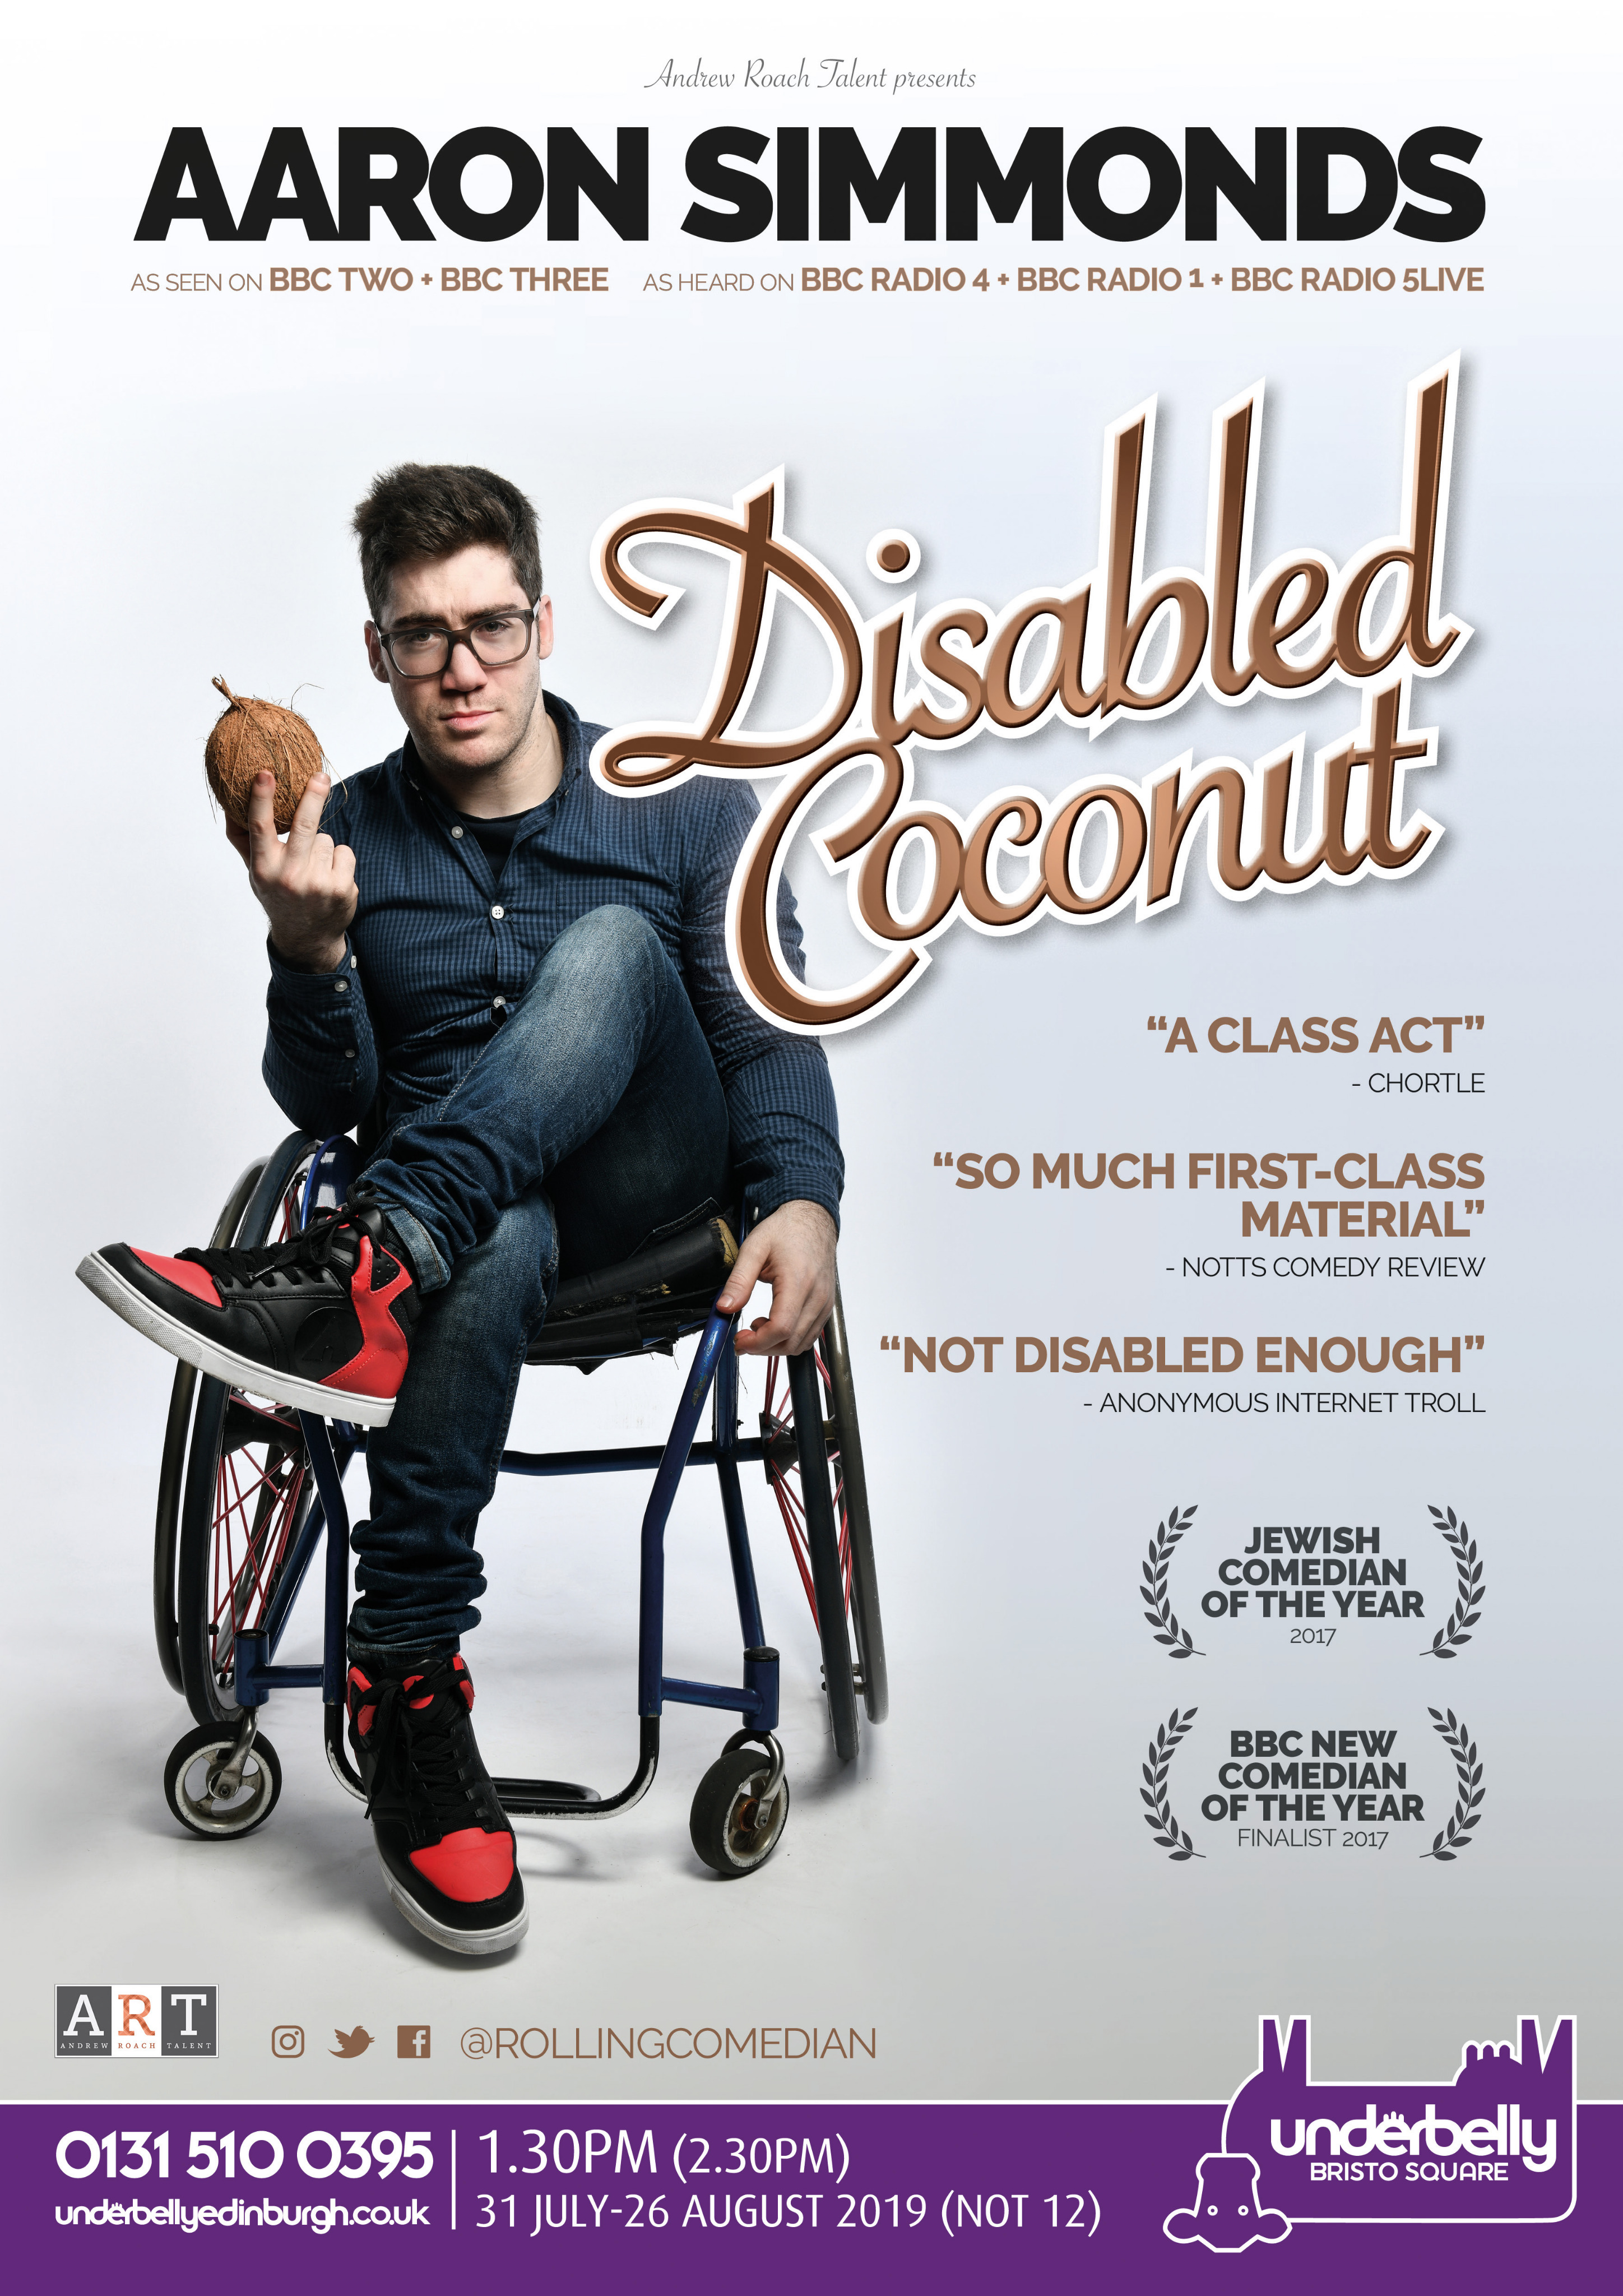 The poster for Aaron Simmonds: Disabled Coconut